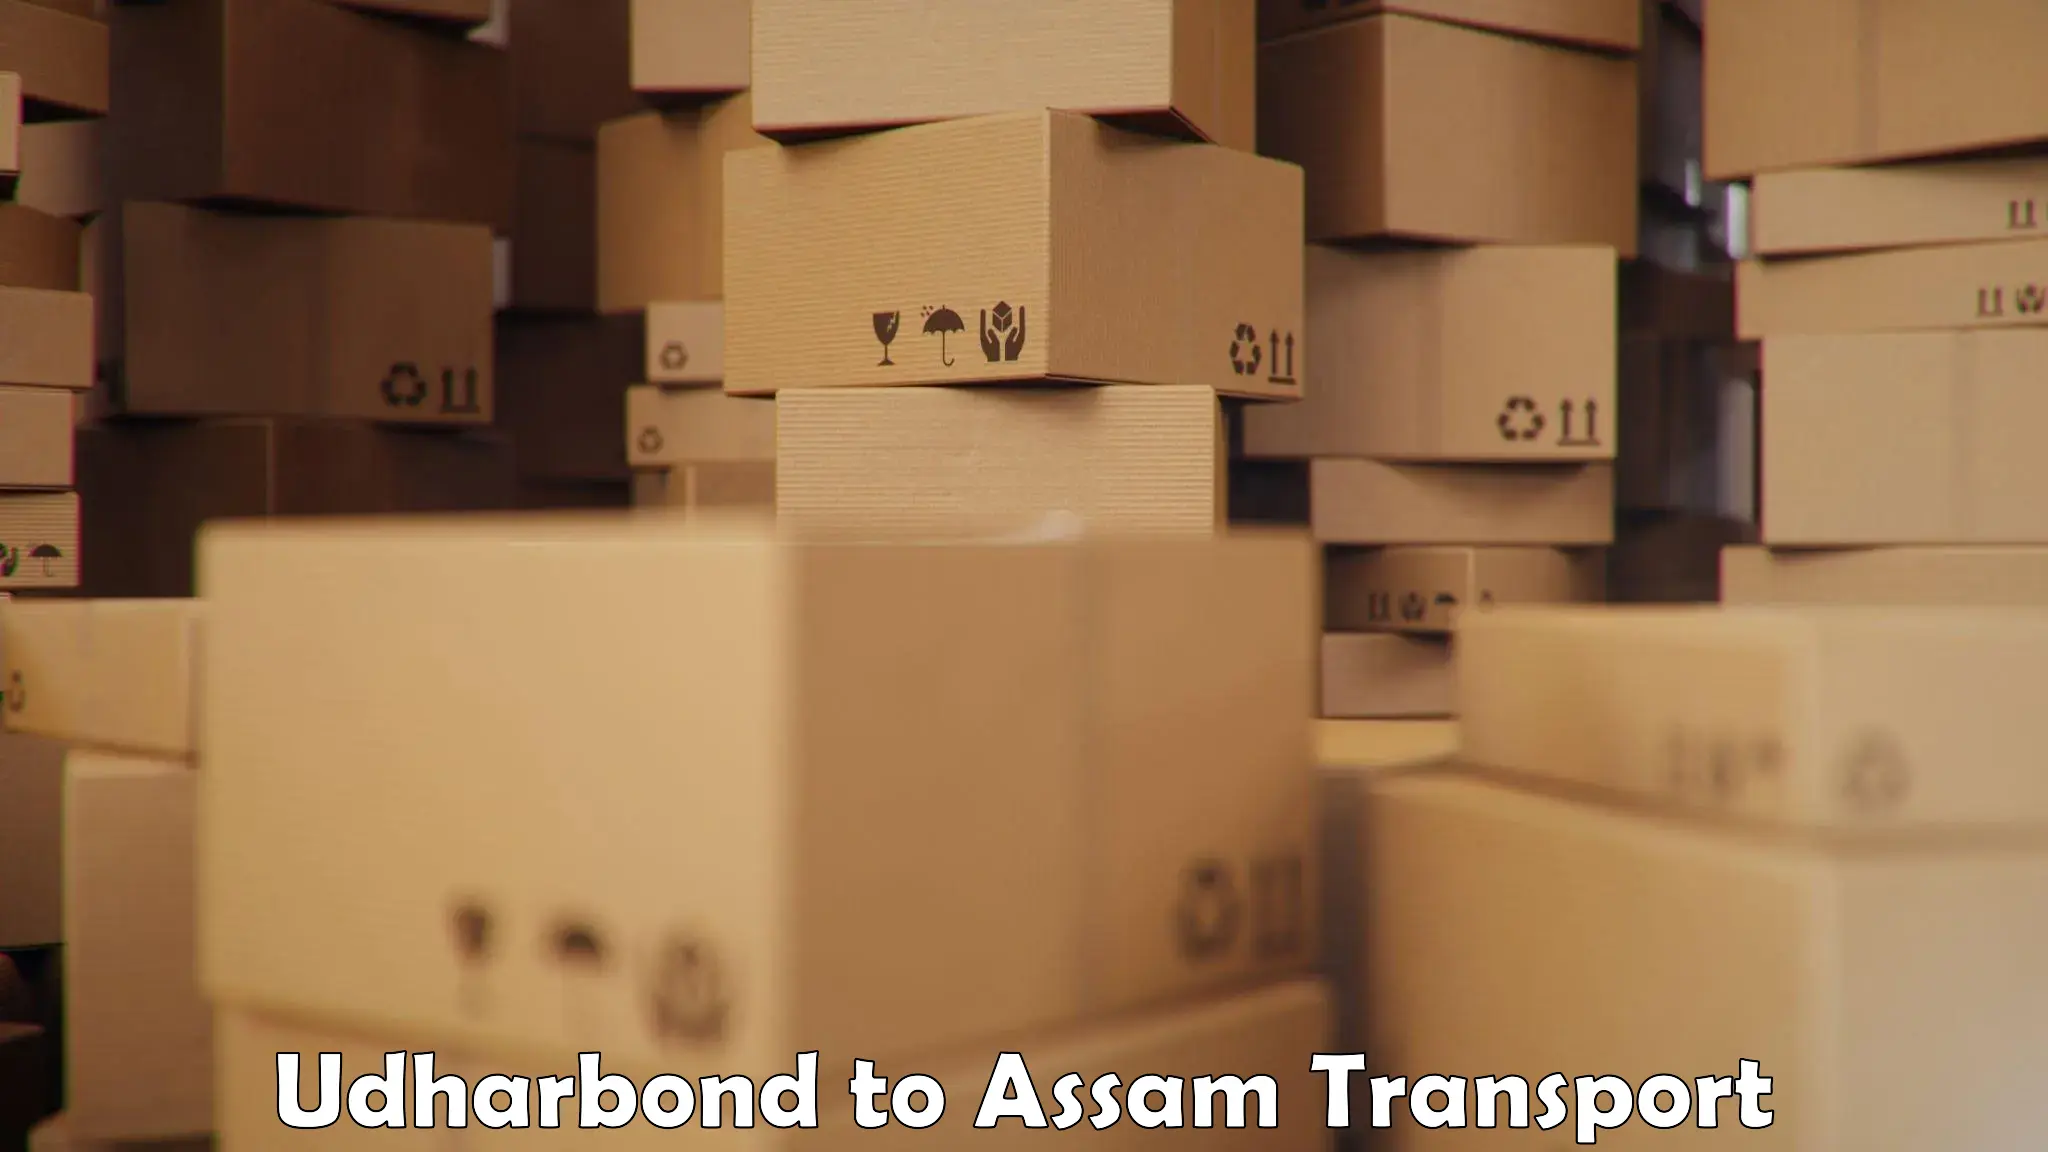 Truck transport companies in India Udharbond to Assam